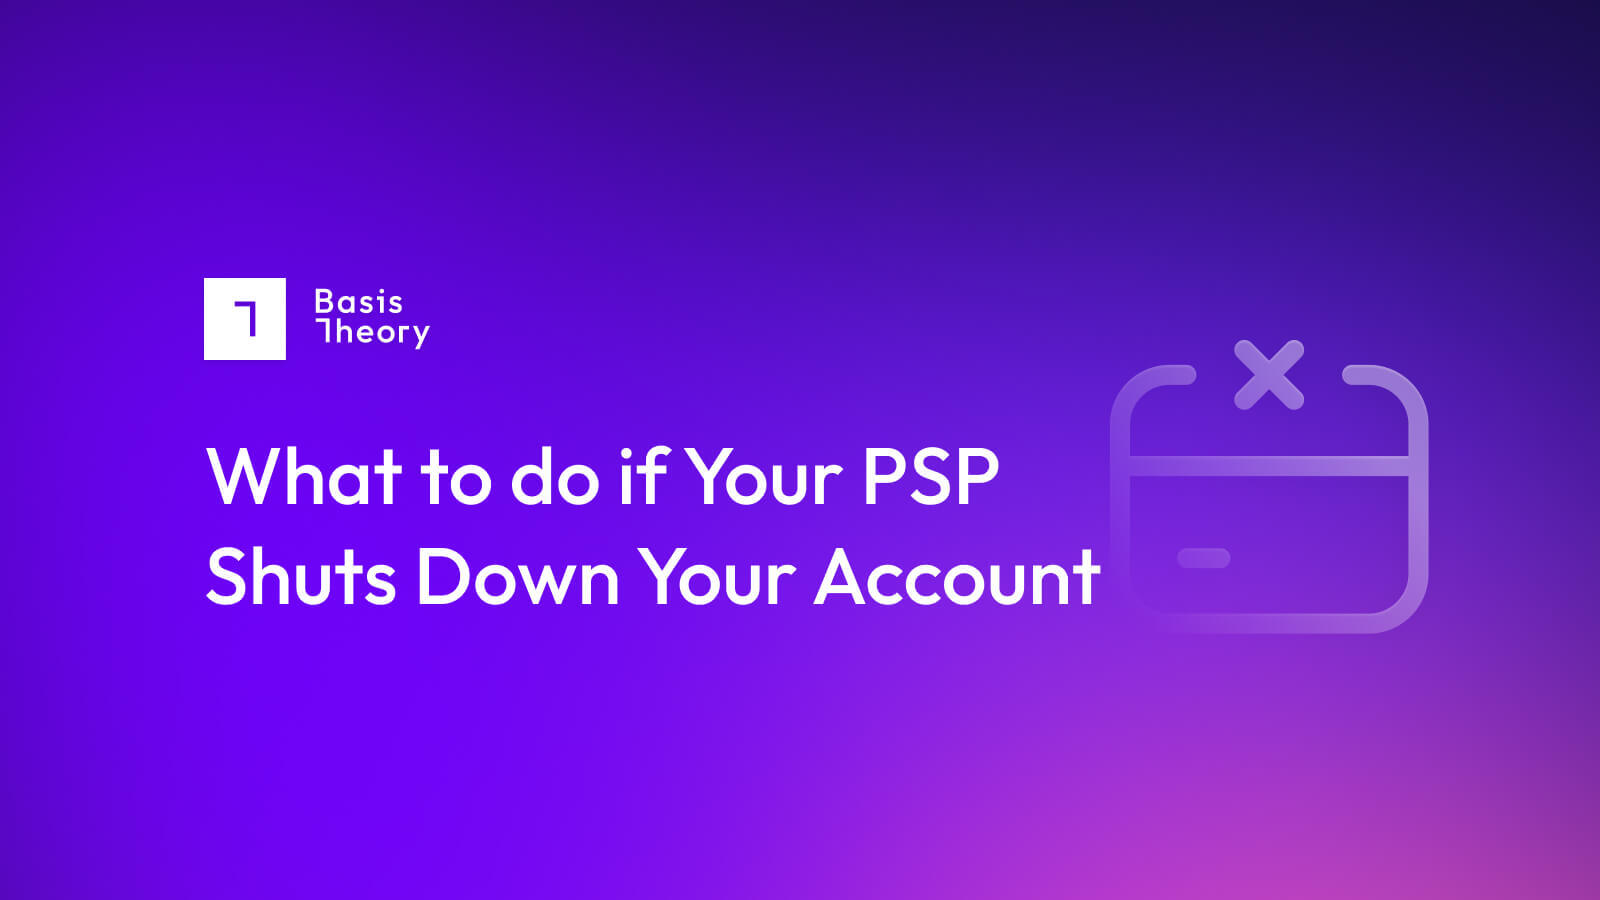 What to do if your PSP Shuts Down Your Account